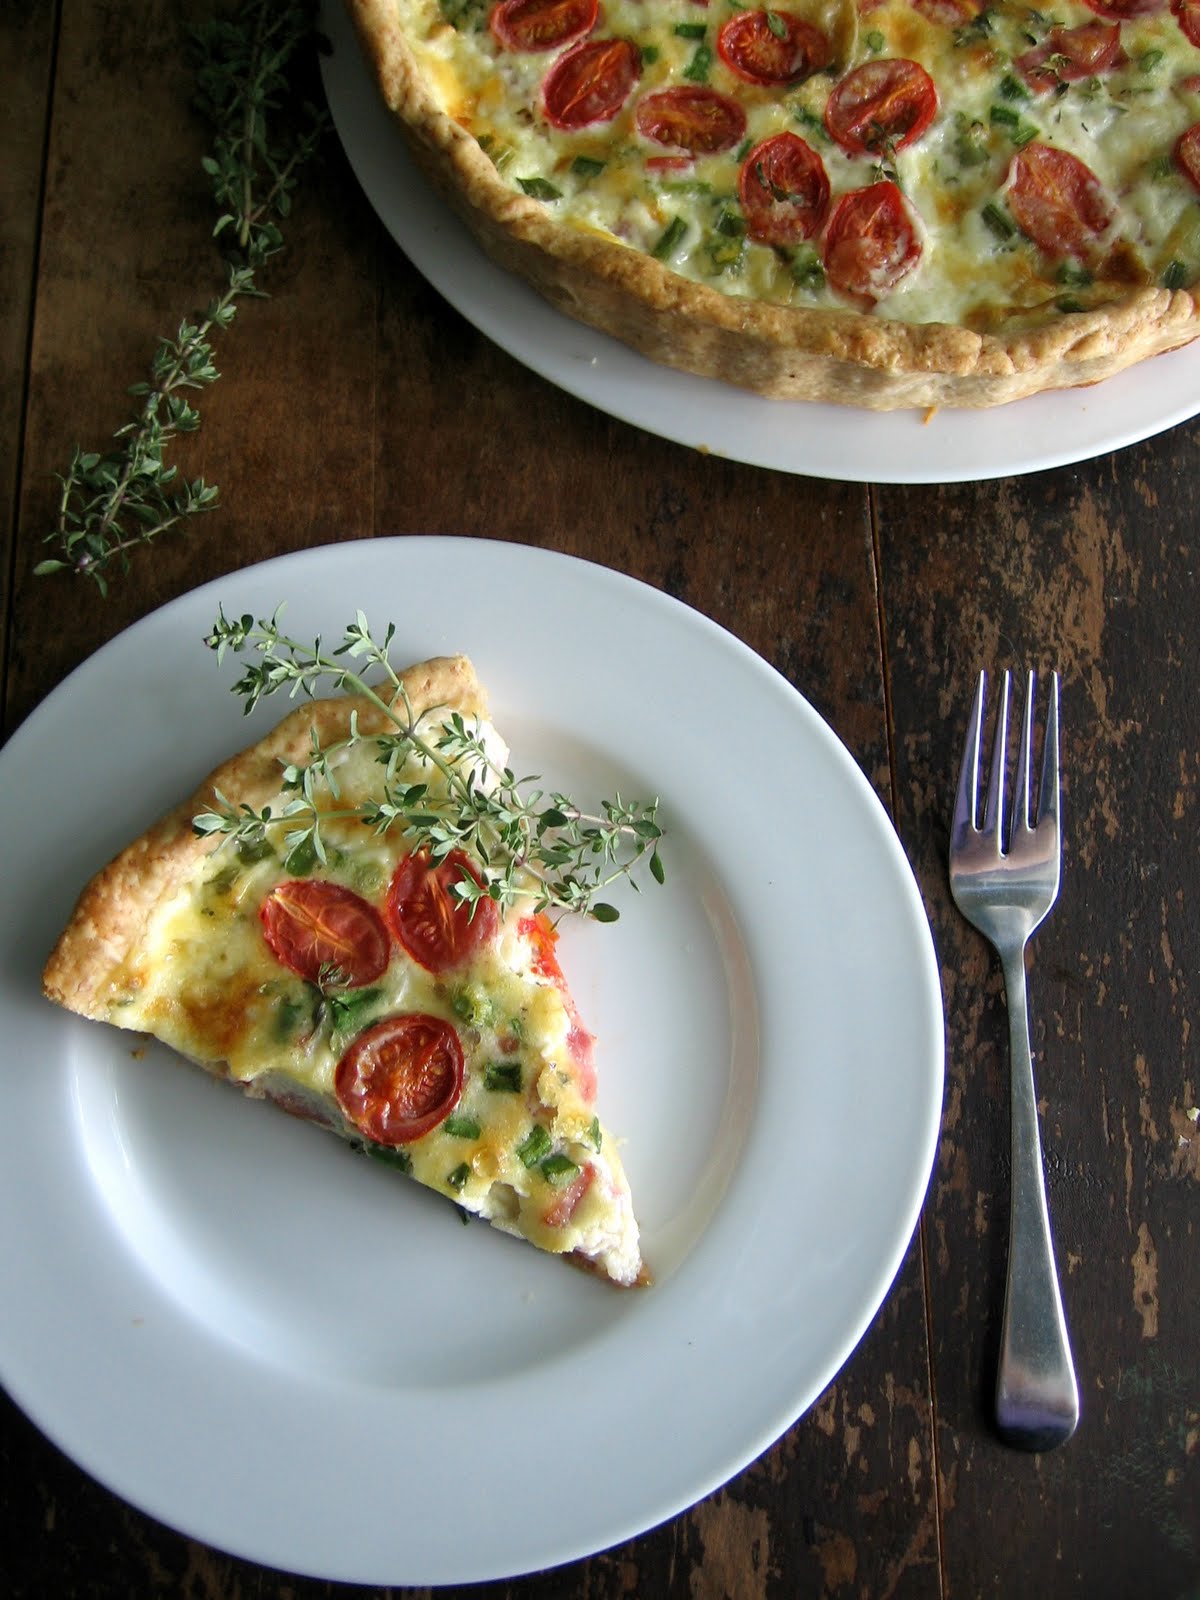 sweetsugarbean: Rustic Ham and Brie Tart With Grape Tomatoes and Thyme